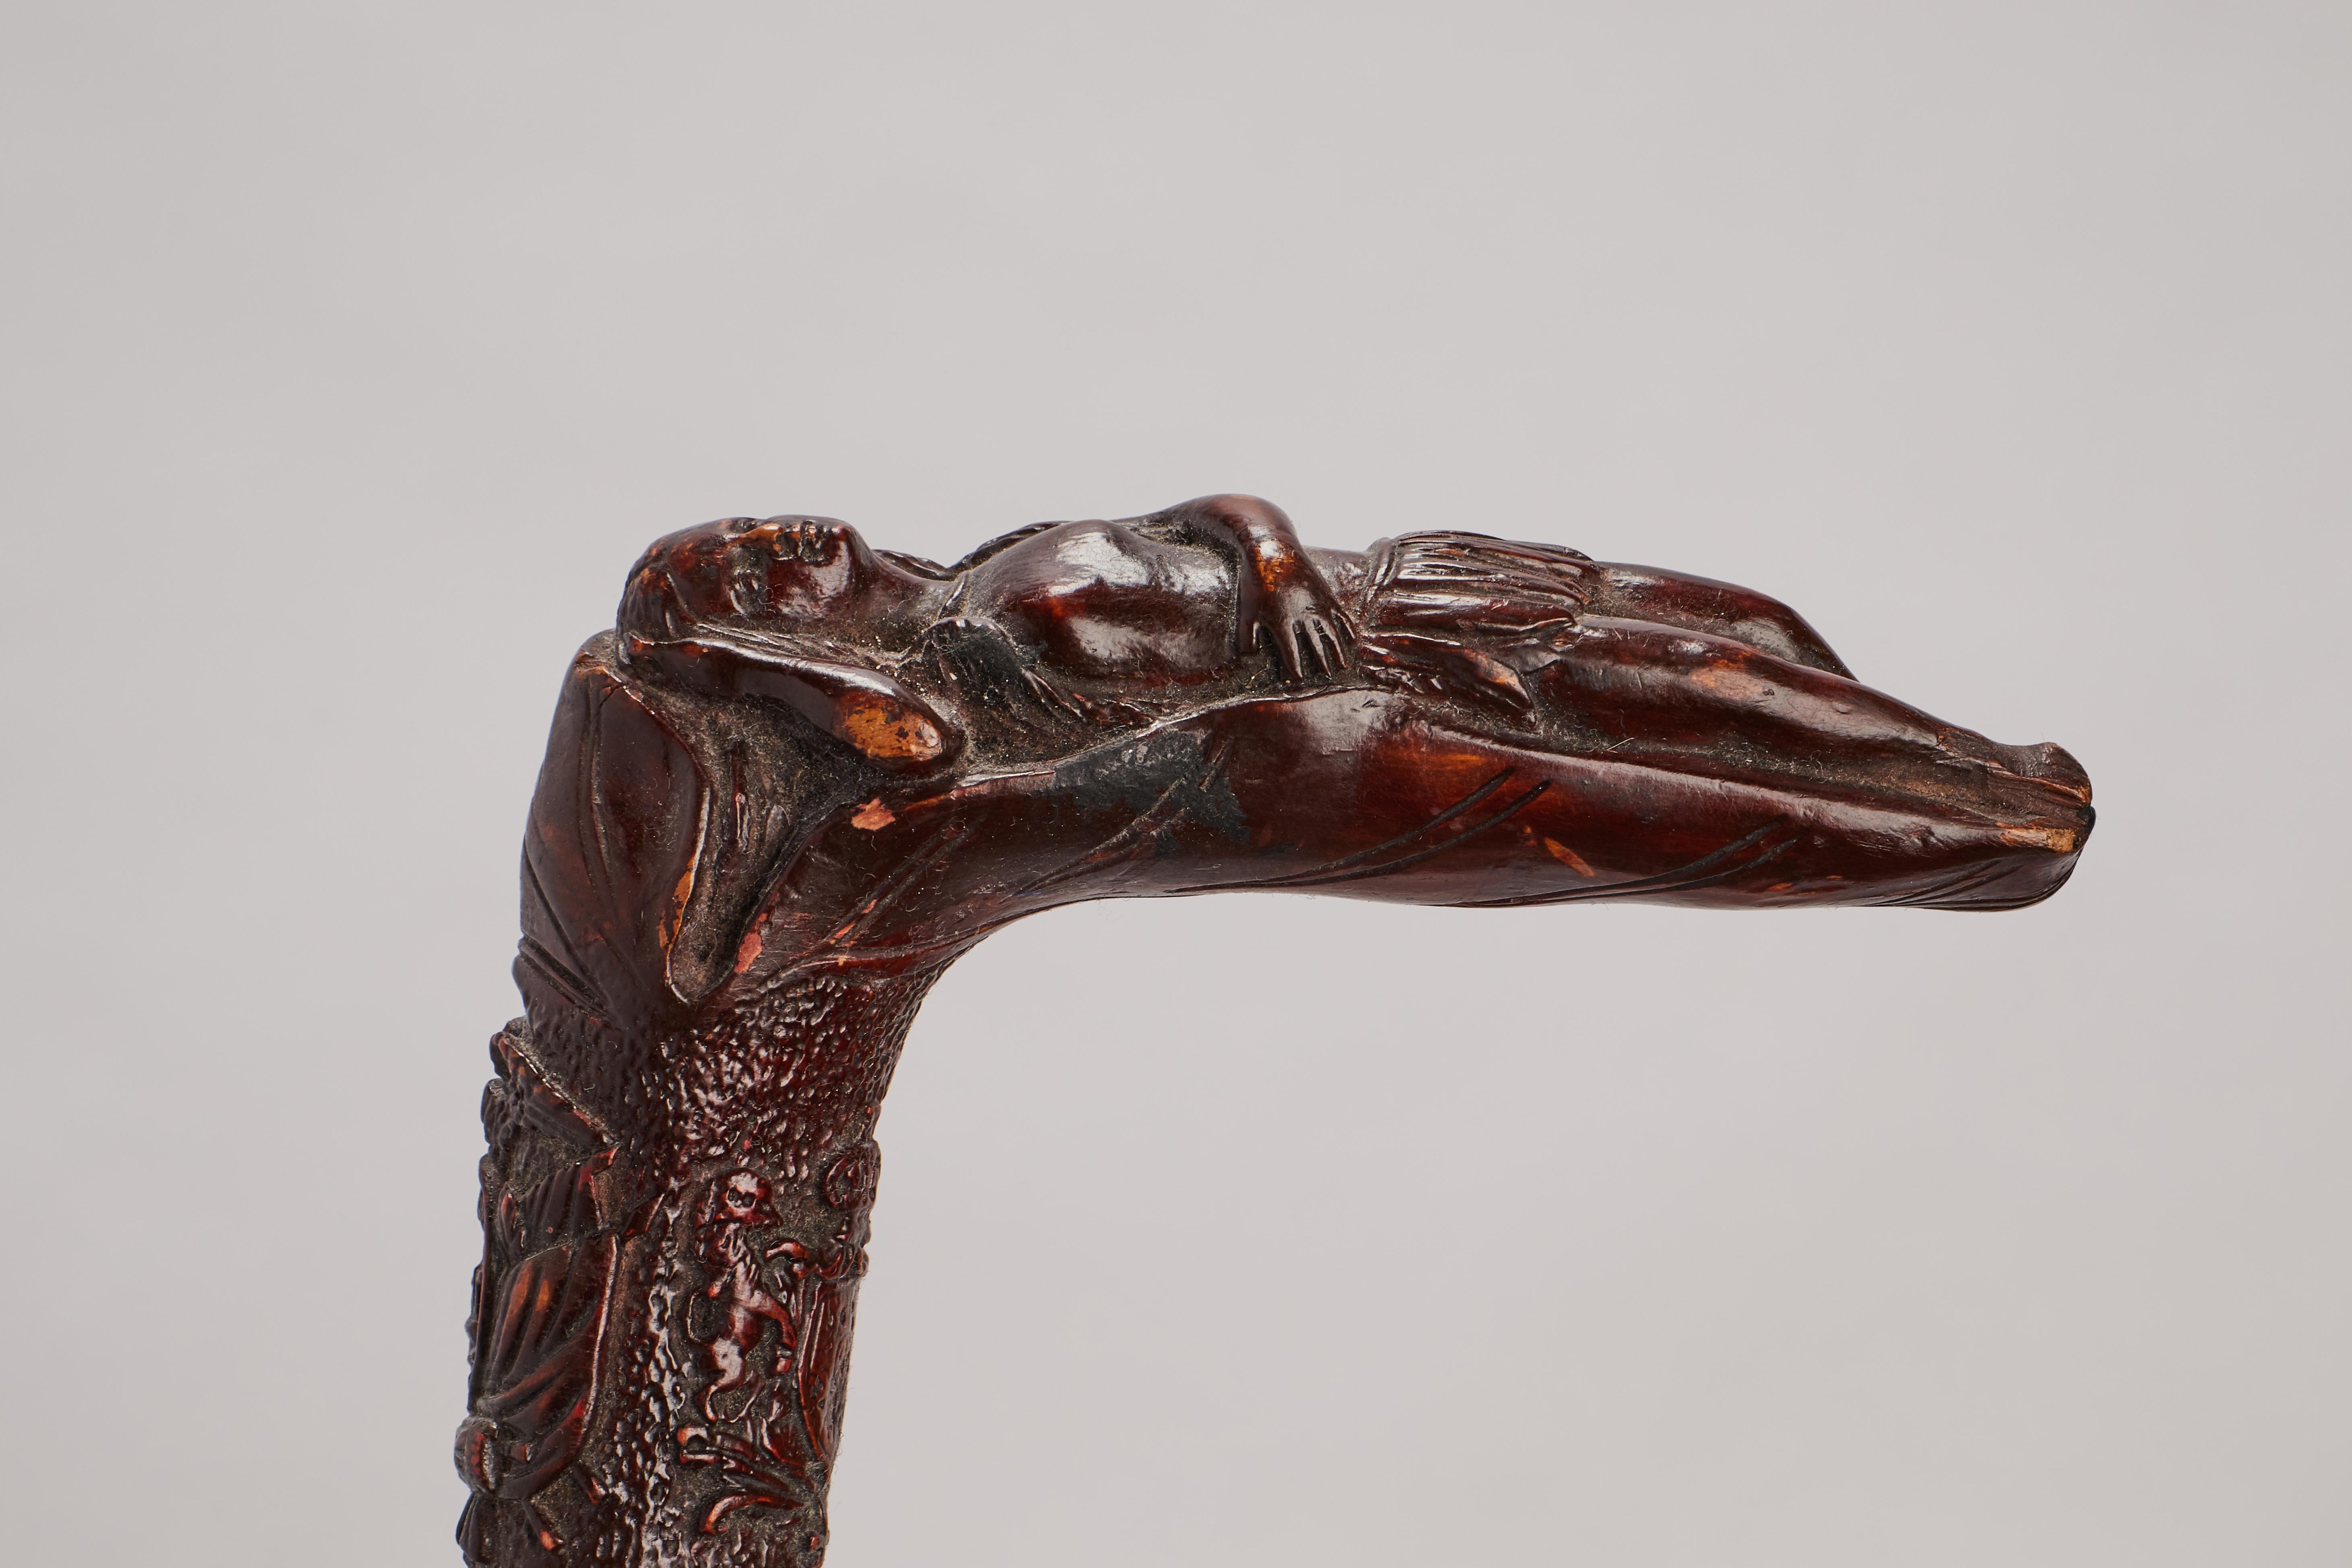 Folk art walking stick: one piece of fruitwood. The handle depicts a laying Indian woman. Engraved characters along the shaft. America XIX cent.